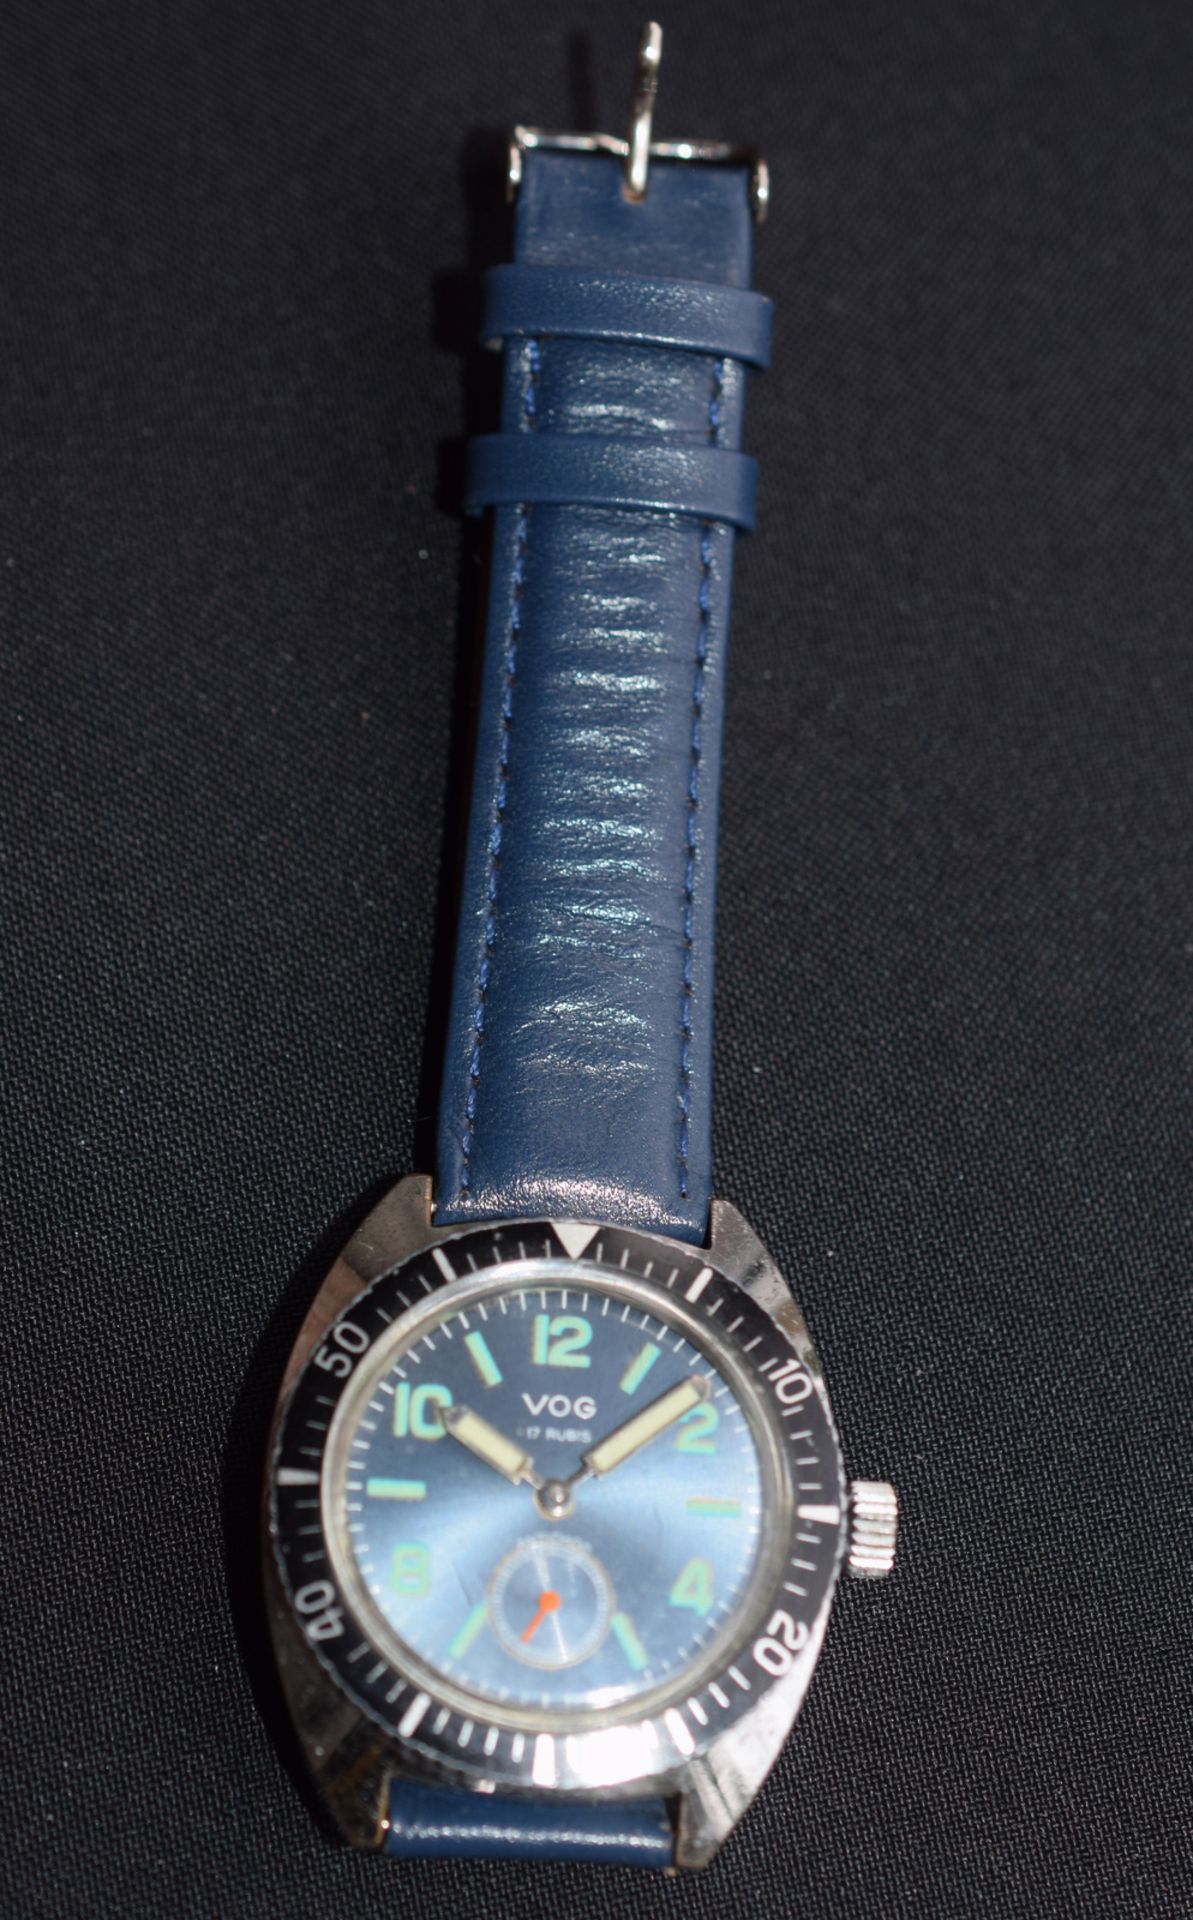 Vog Diver's Style Wristwatch - no reserve - Image 3 of 4